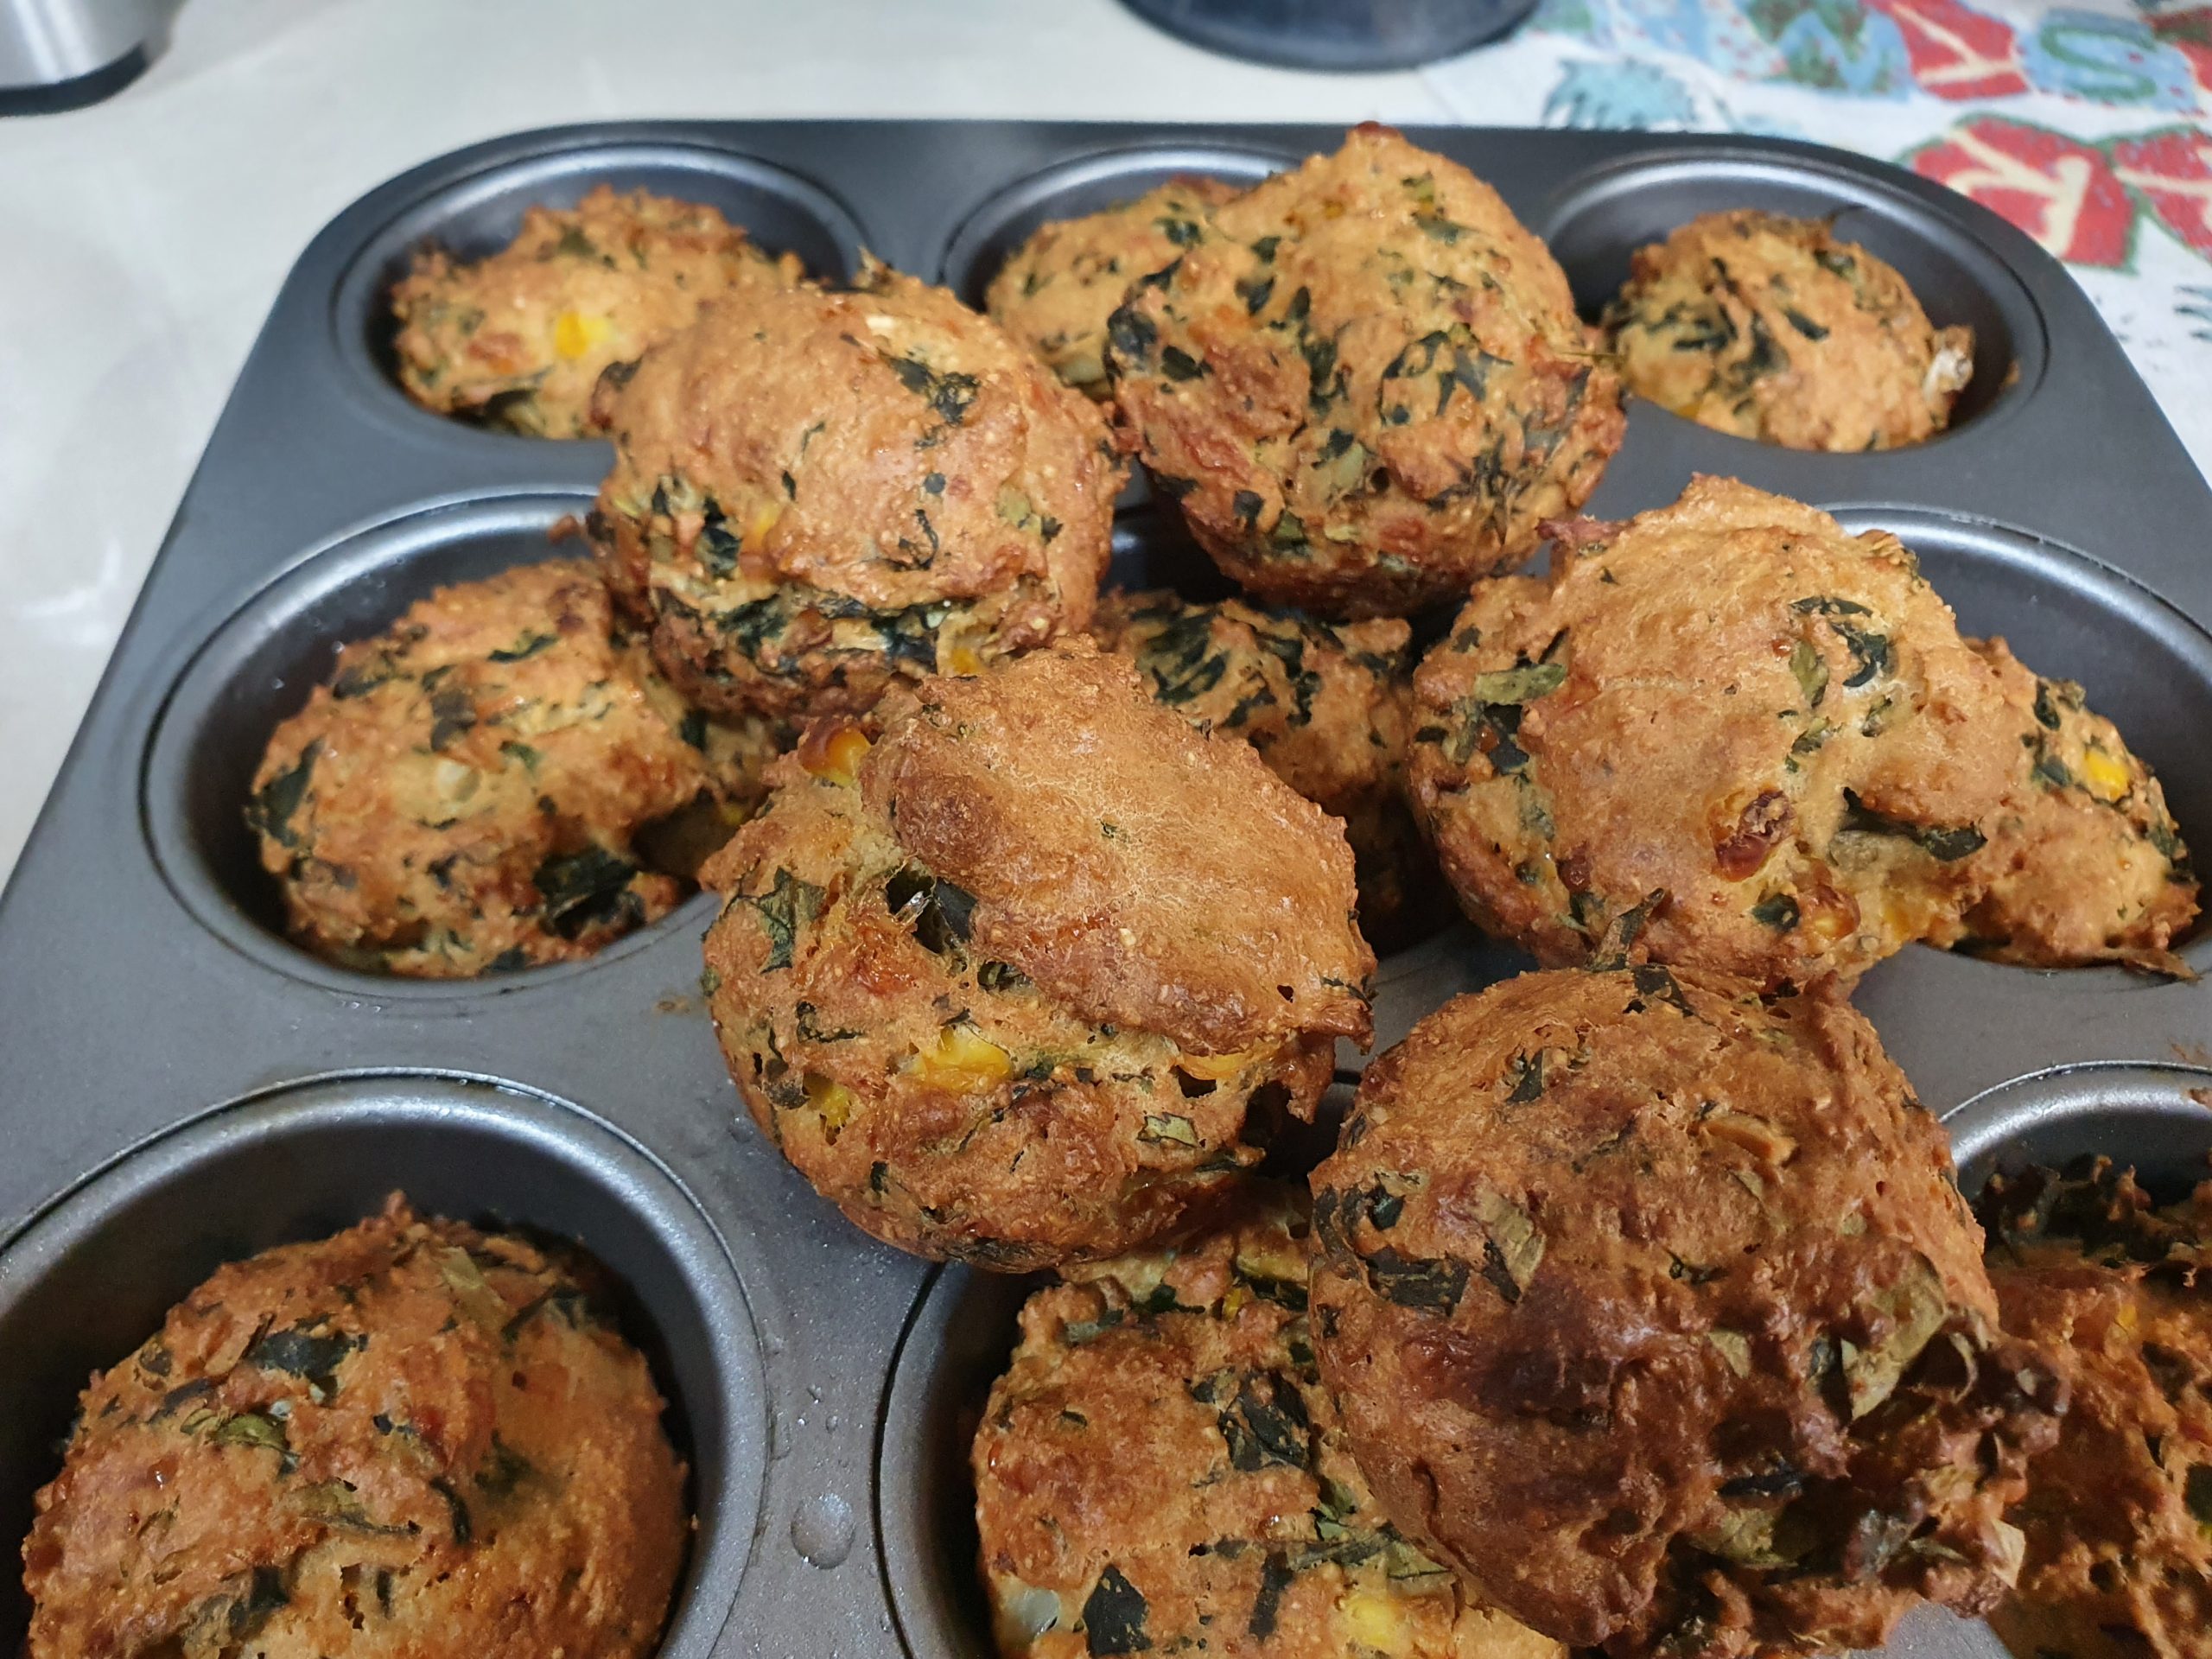 a tray of freshly baked, home made basil and spinach muffines